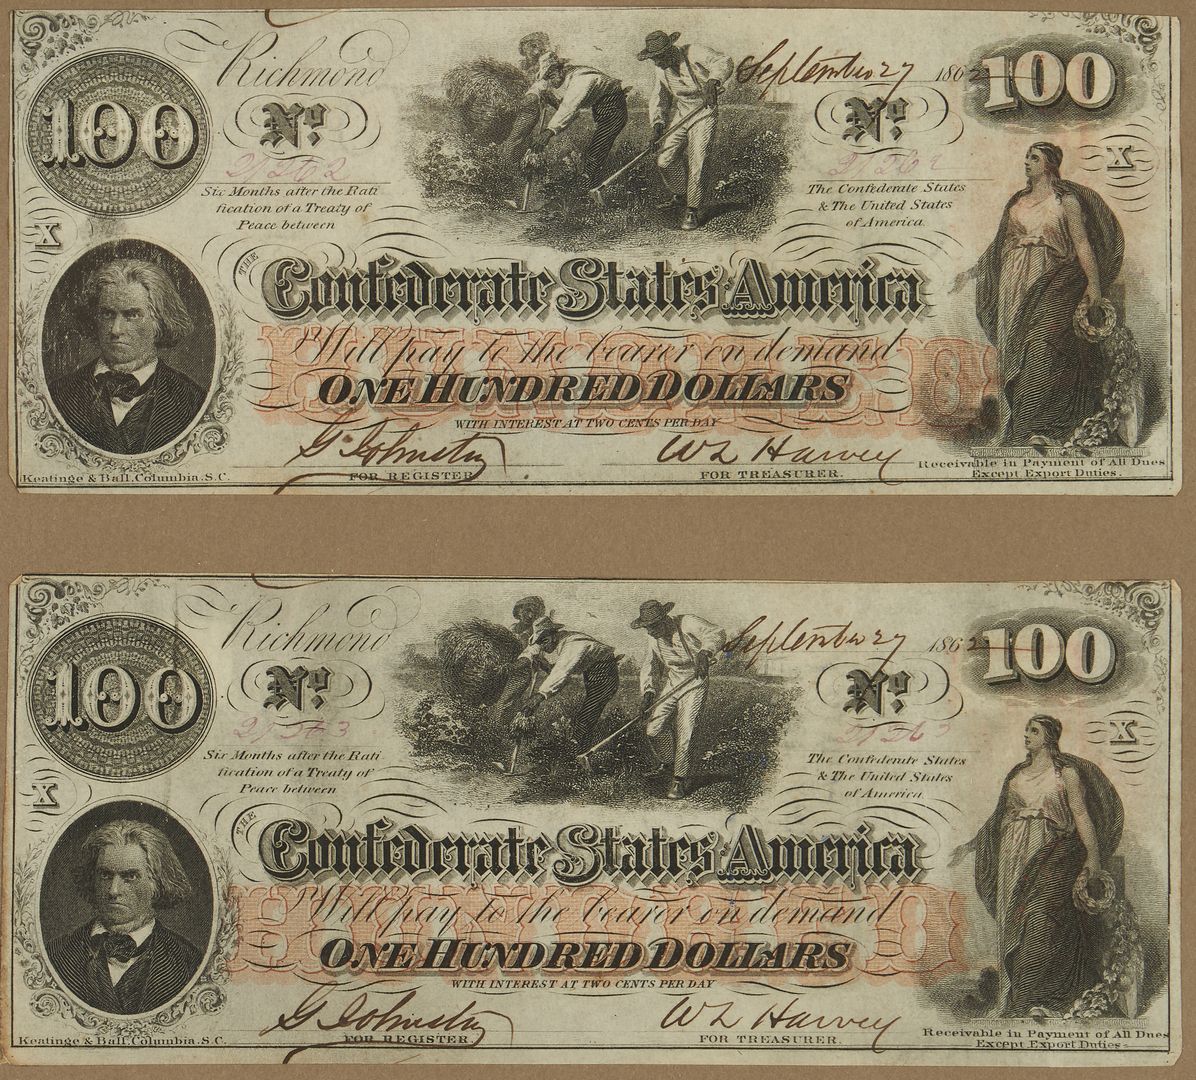 Lot 1155: T-64 $500 CSA Note, Framed Currency and Stamps, incl. T-41 $100